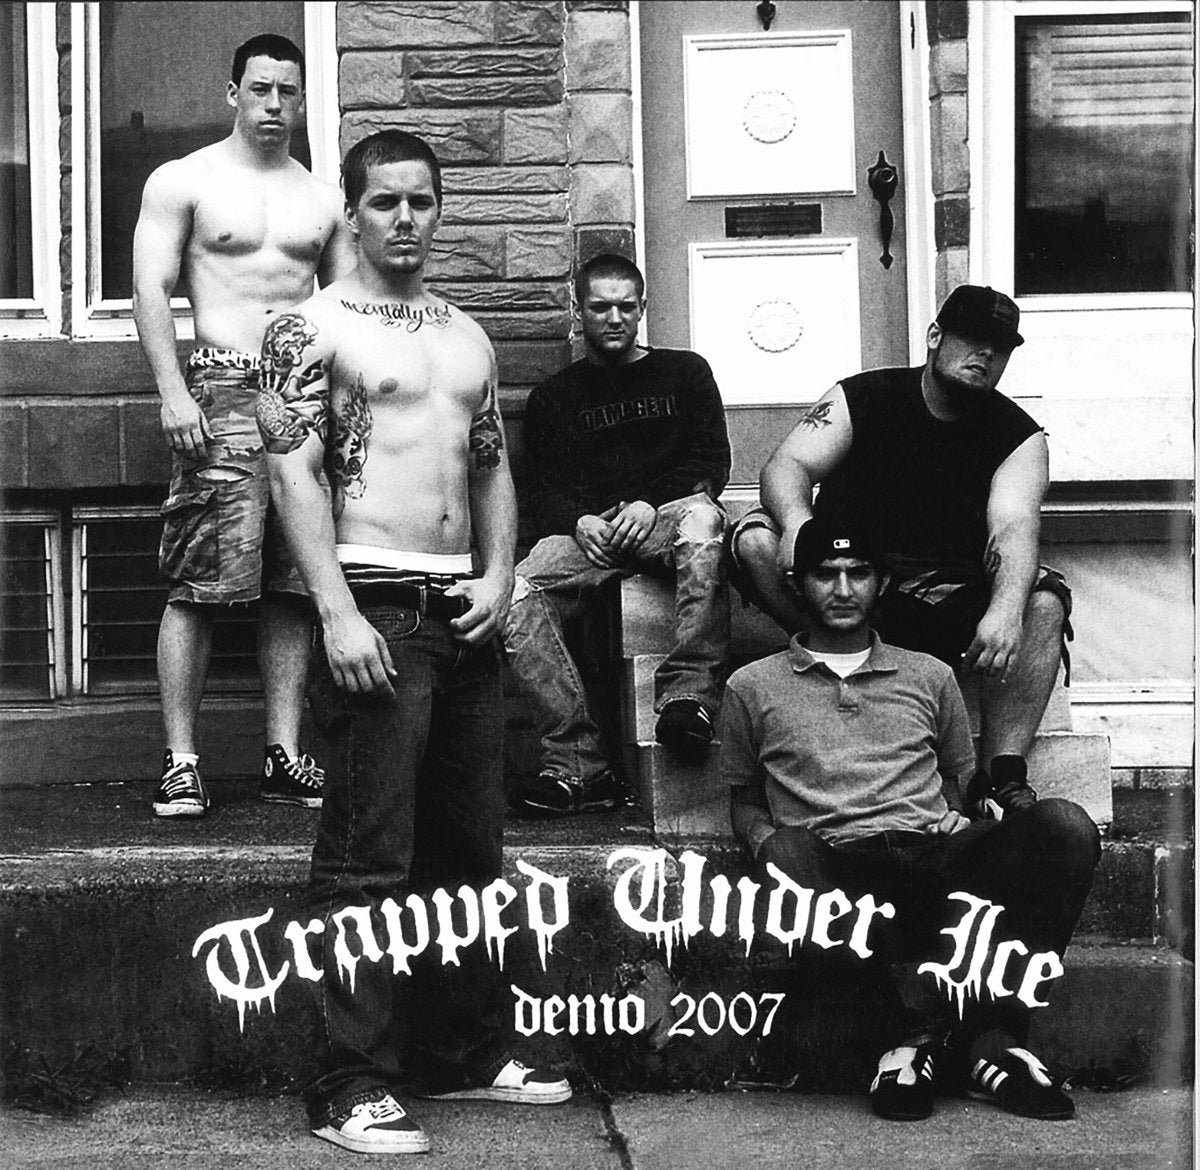 Trapped Under Ice  "Demo 2007". 7"